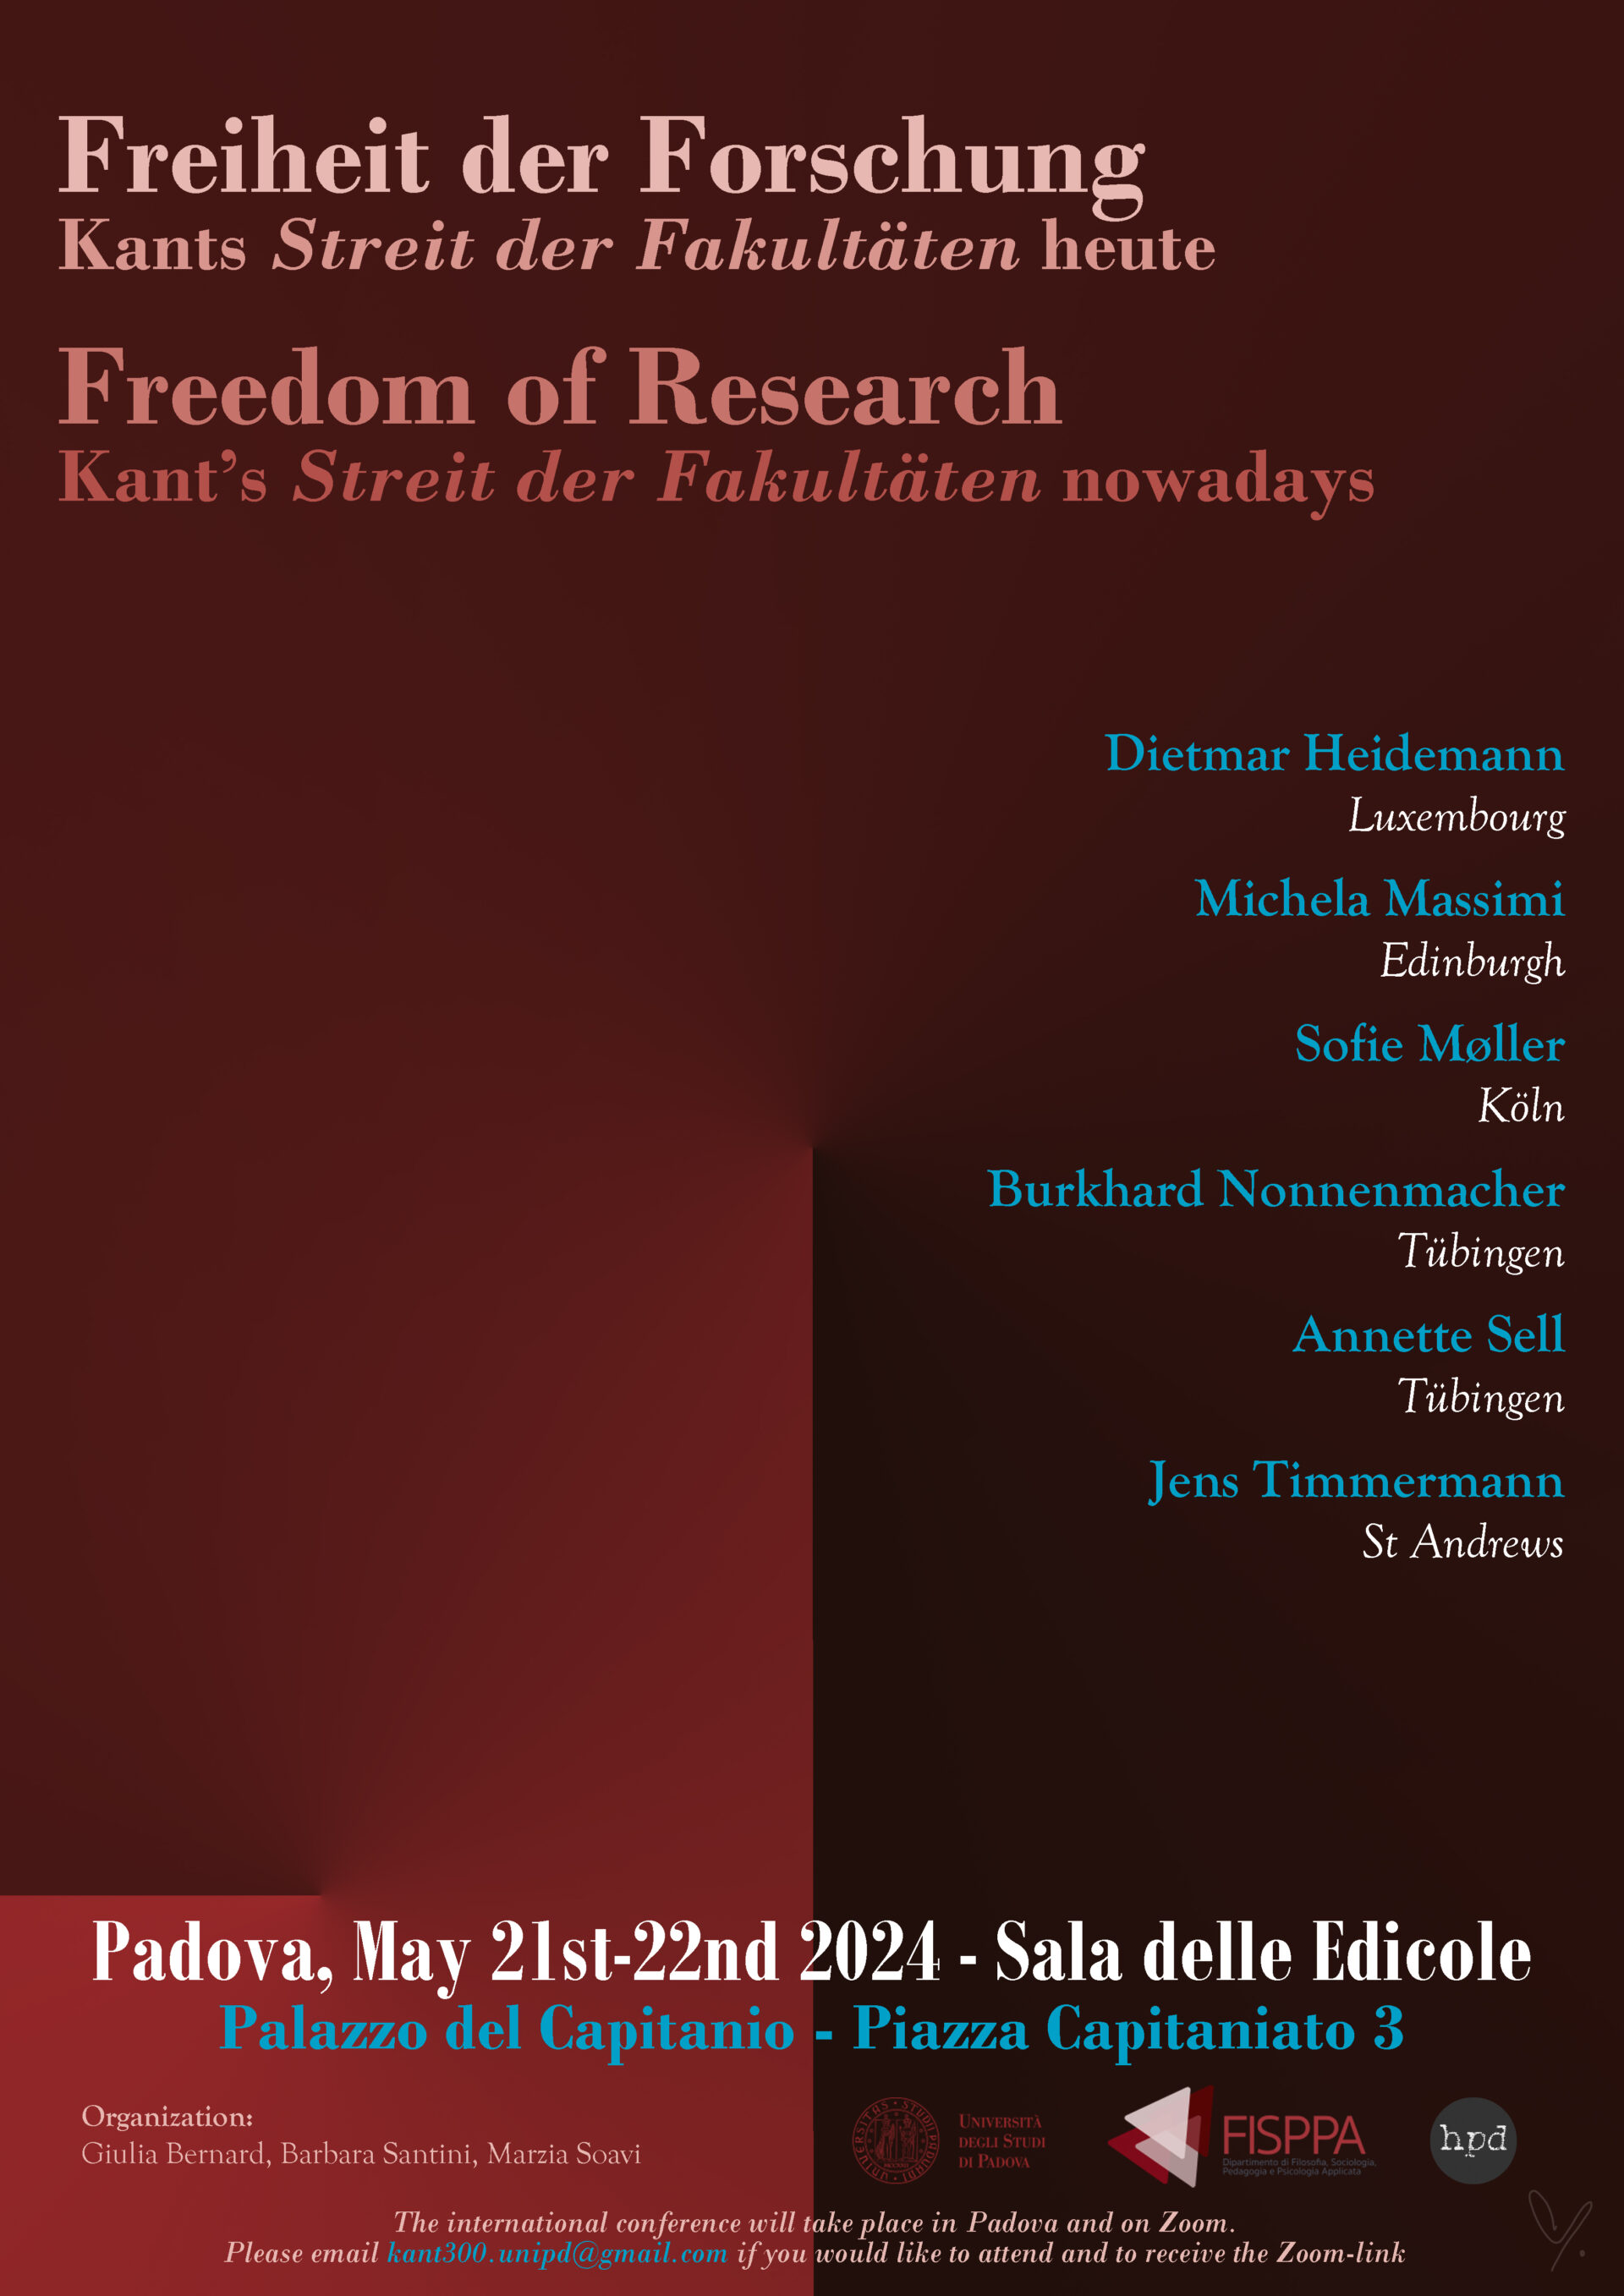 International Conference: “Freedom of Research. Kant’s Streit der Fakultäten nowadays” (Padova, 21-22 May 2024)